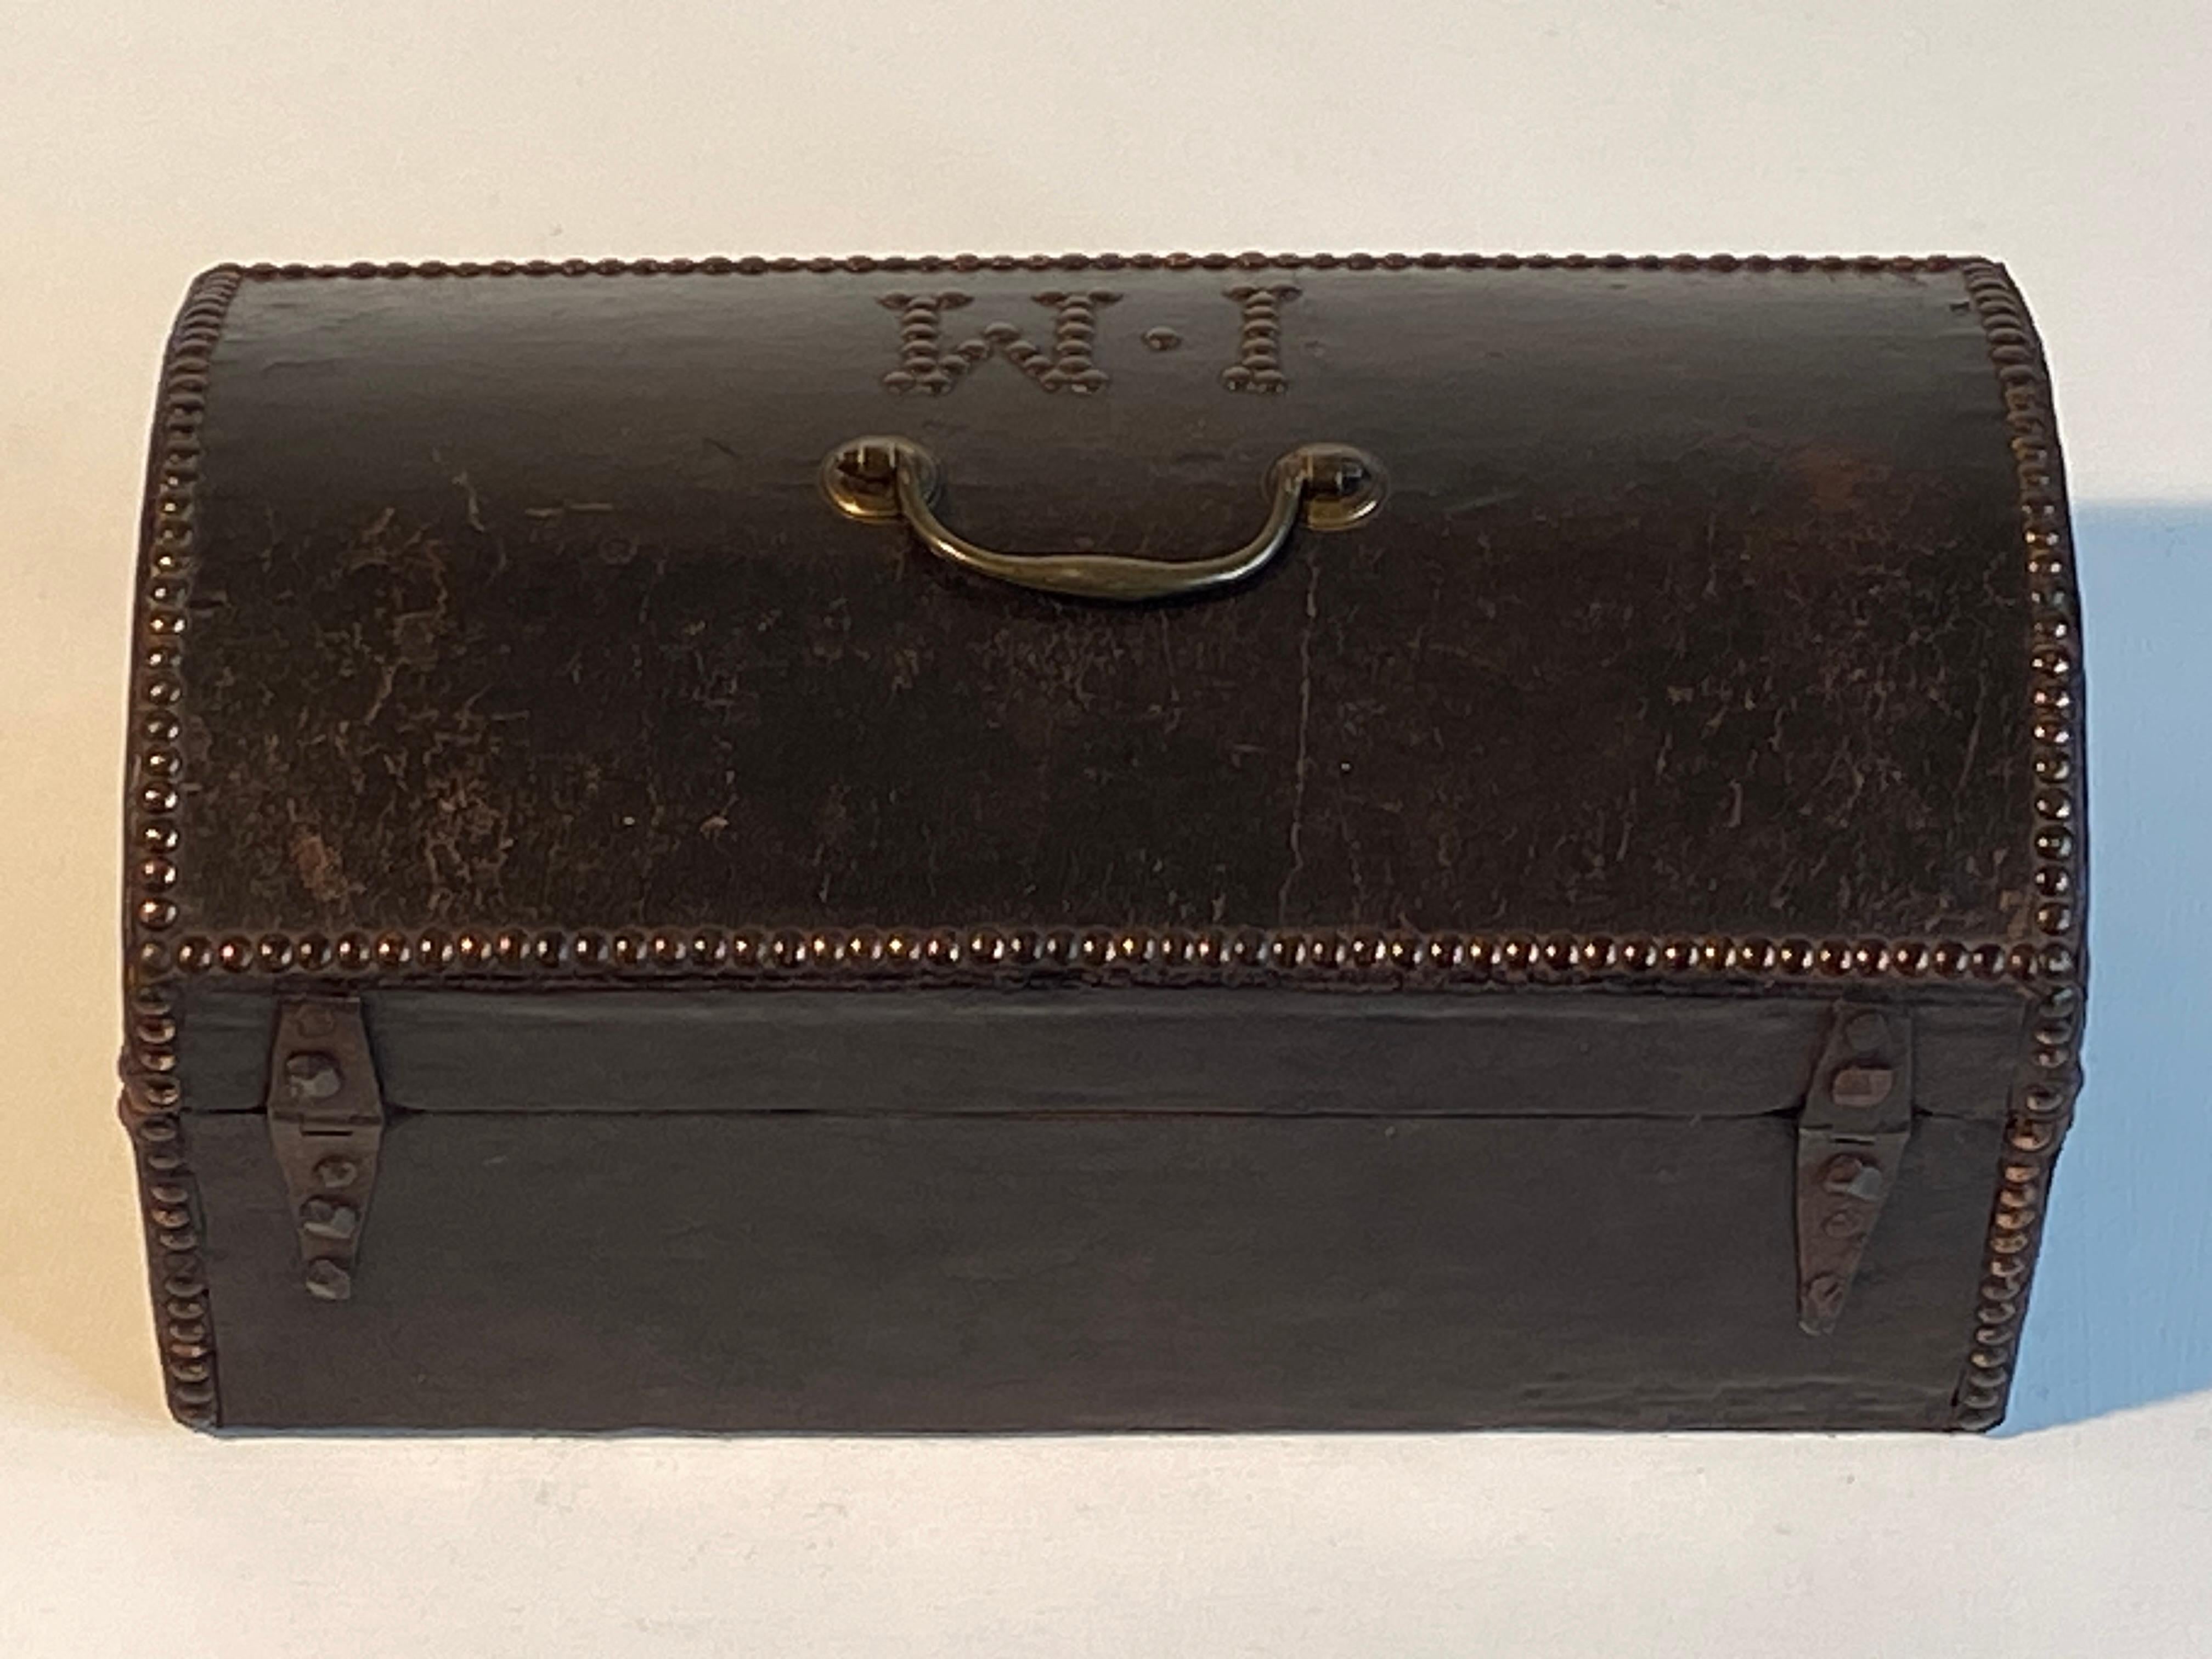 Regency Leather Studded Campaign Case Trunk by Chapple & Sons Initials 